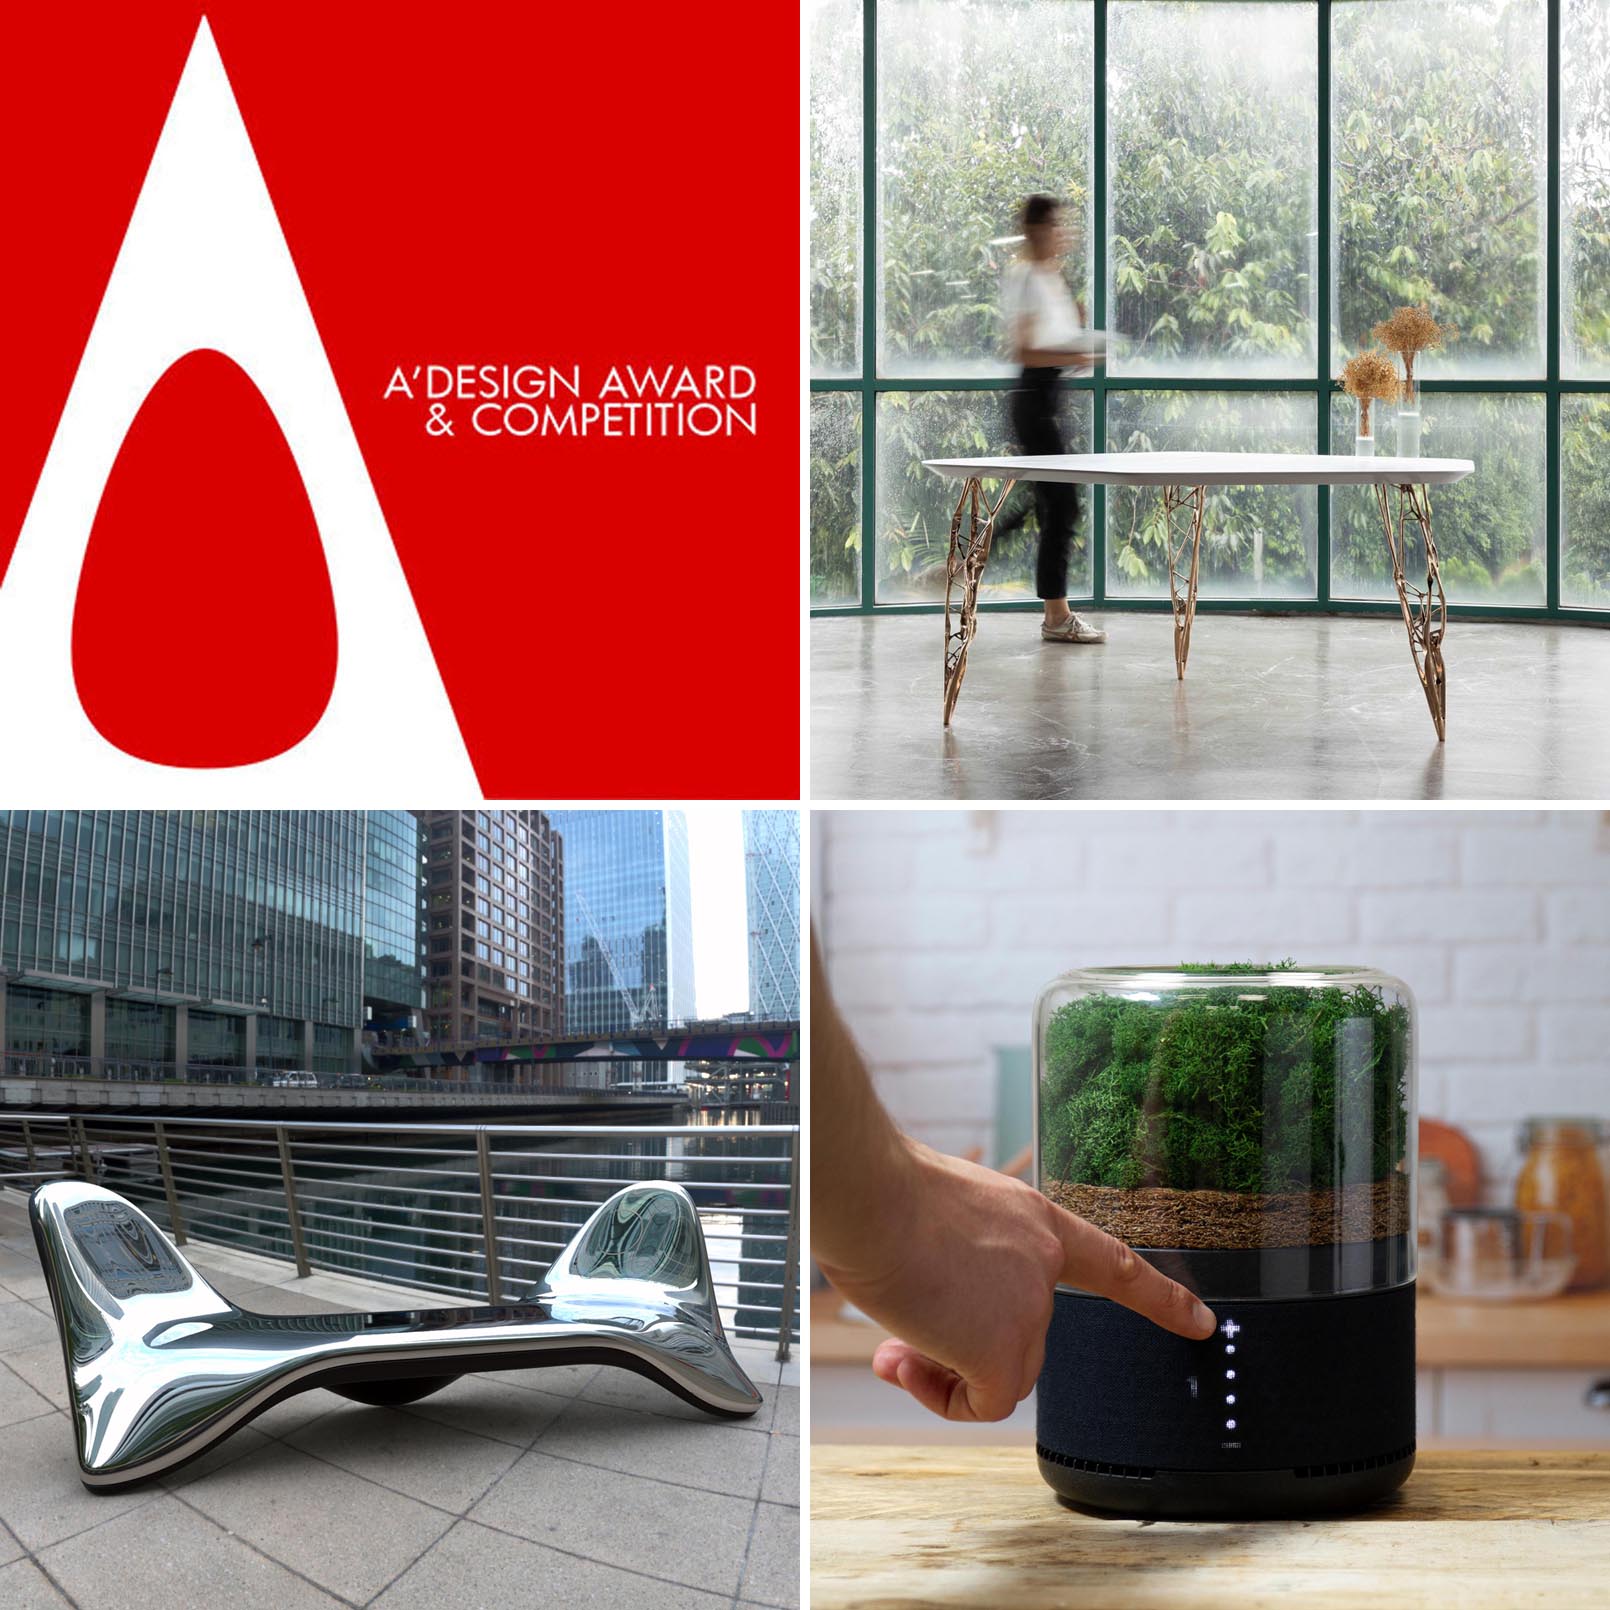 A’ Design Award & Competition is the Worlds’ leading design accolade reaching design enthusiasts around the world, and showcasing 14,500 award winners from 104 different design disciplines